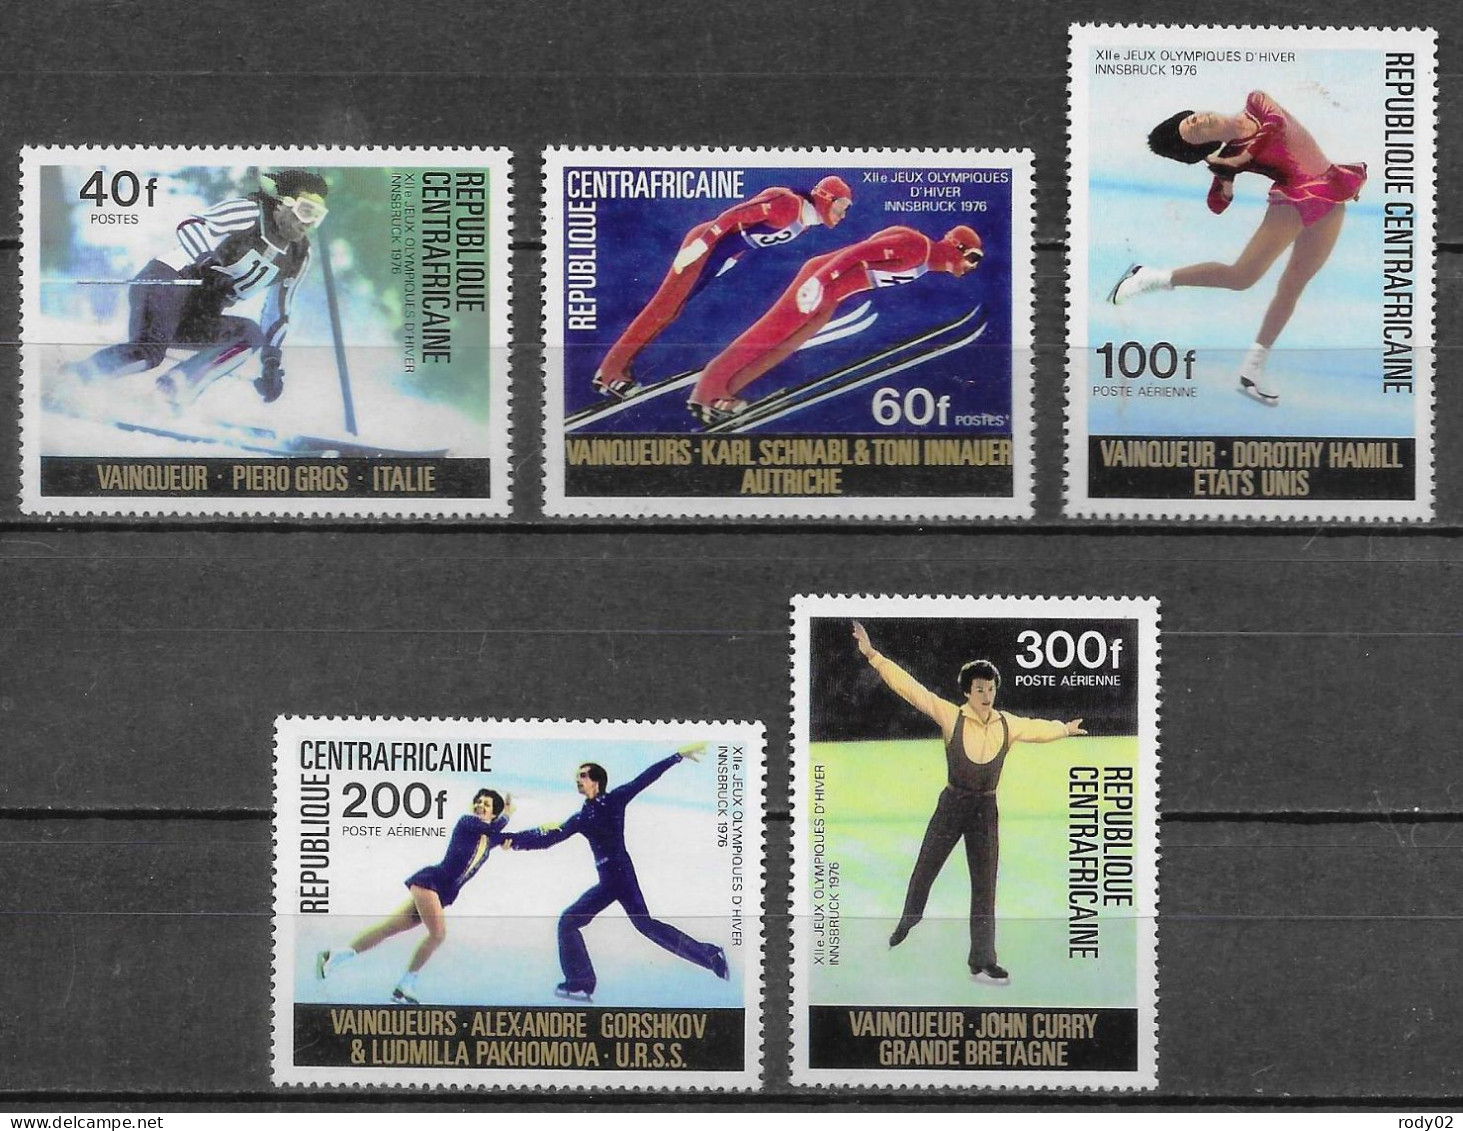 CENTRAFRIQUE - JEUX OLYMPIQUES D'HIVER A INNSBRUCK  - N° 262 ET 263, PA 150 A 152 ET BF 11 - NEUF** MNH - Hiver 1976: Innsbruck